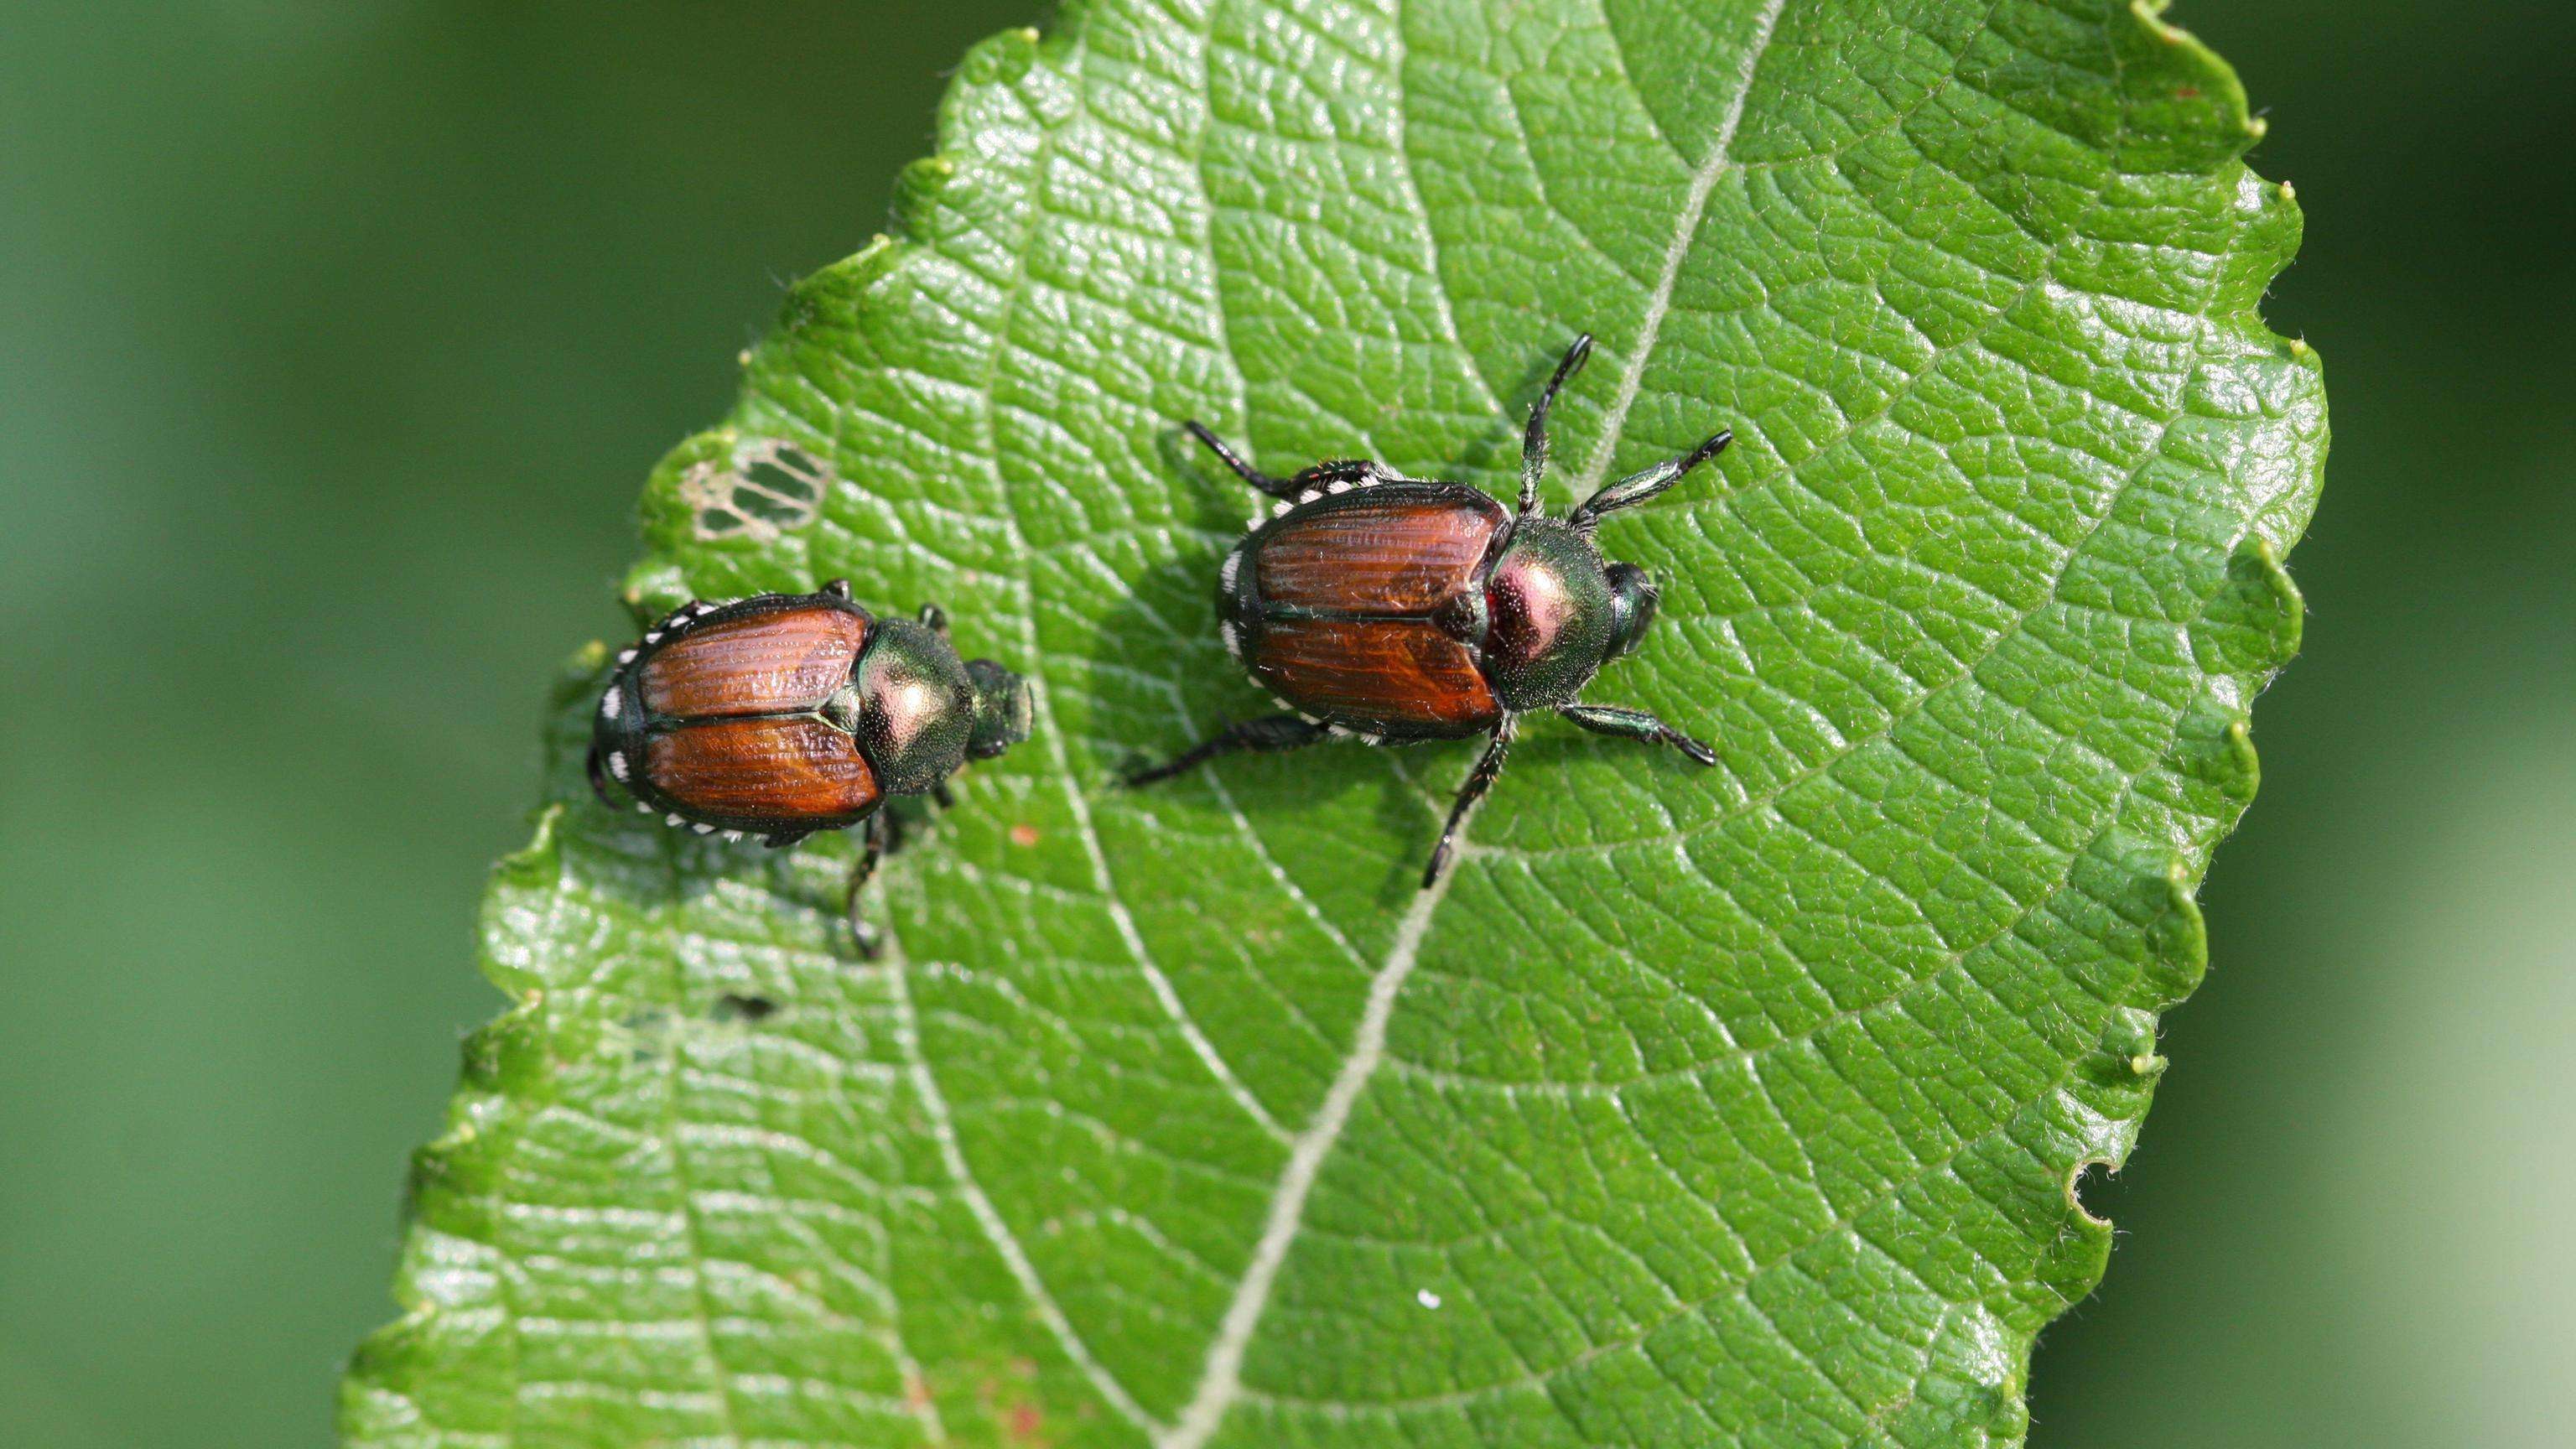 Two oval-shaped beetles approximately one-third to one-half inch long and about one-fourth inch wide with metallic green bodies and bronze or coppery-brown wings.